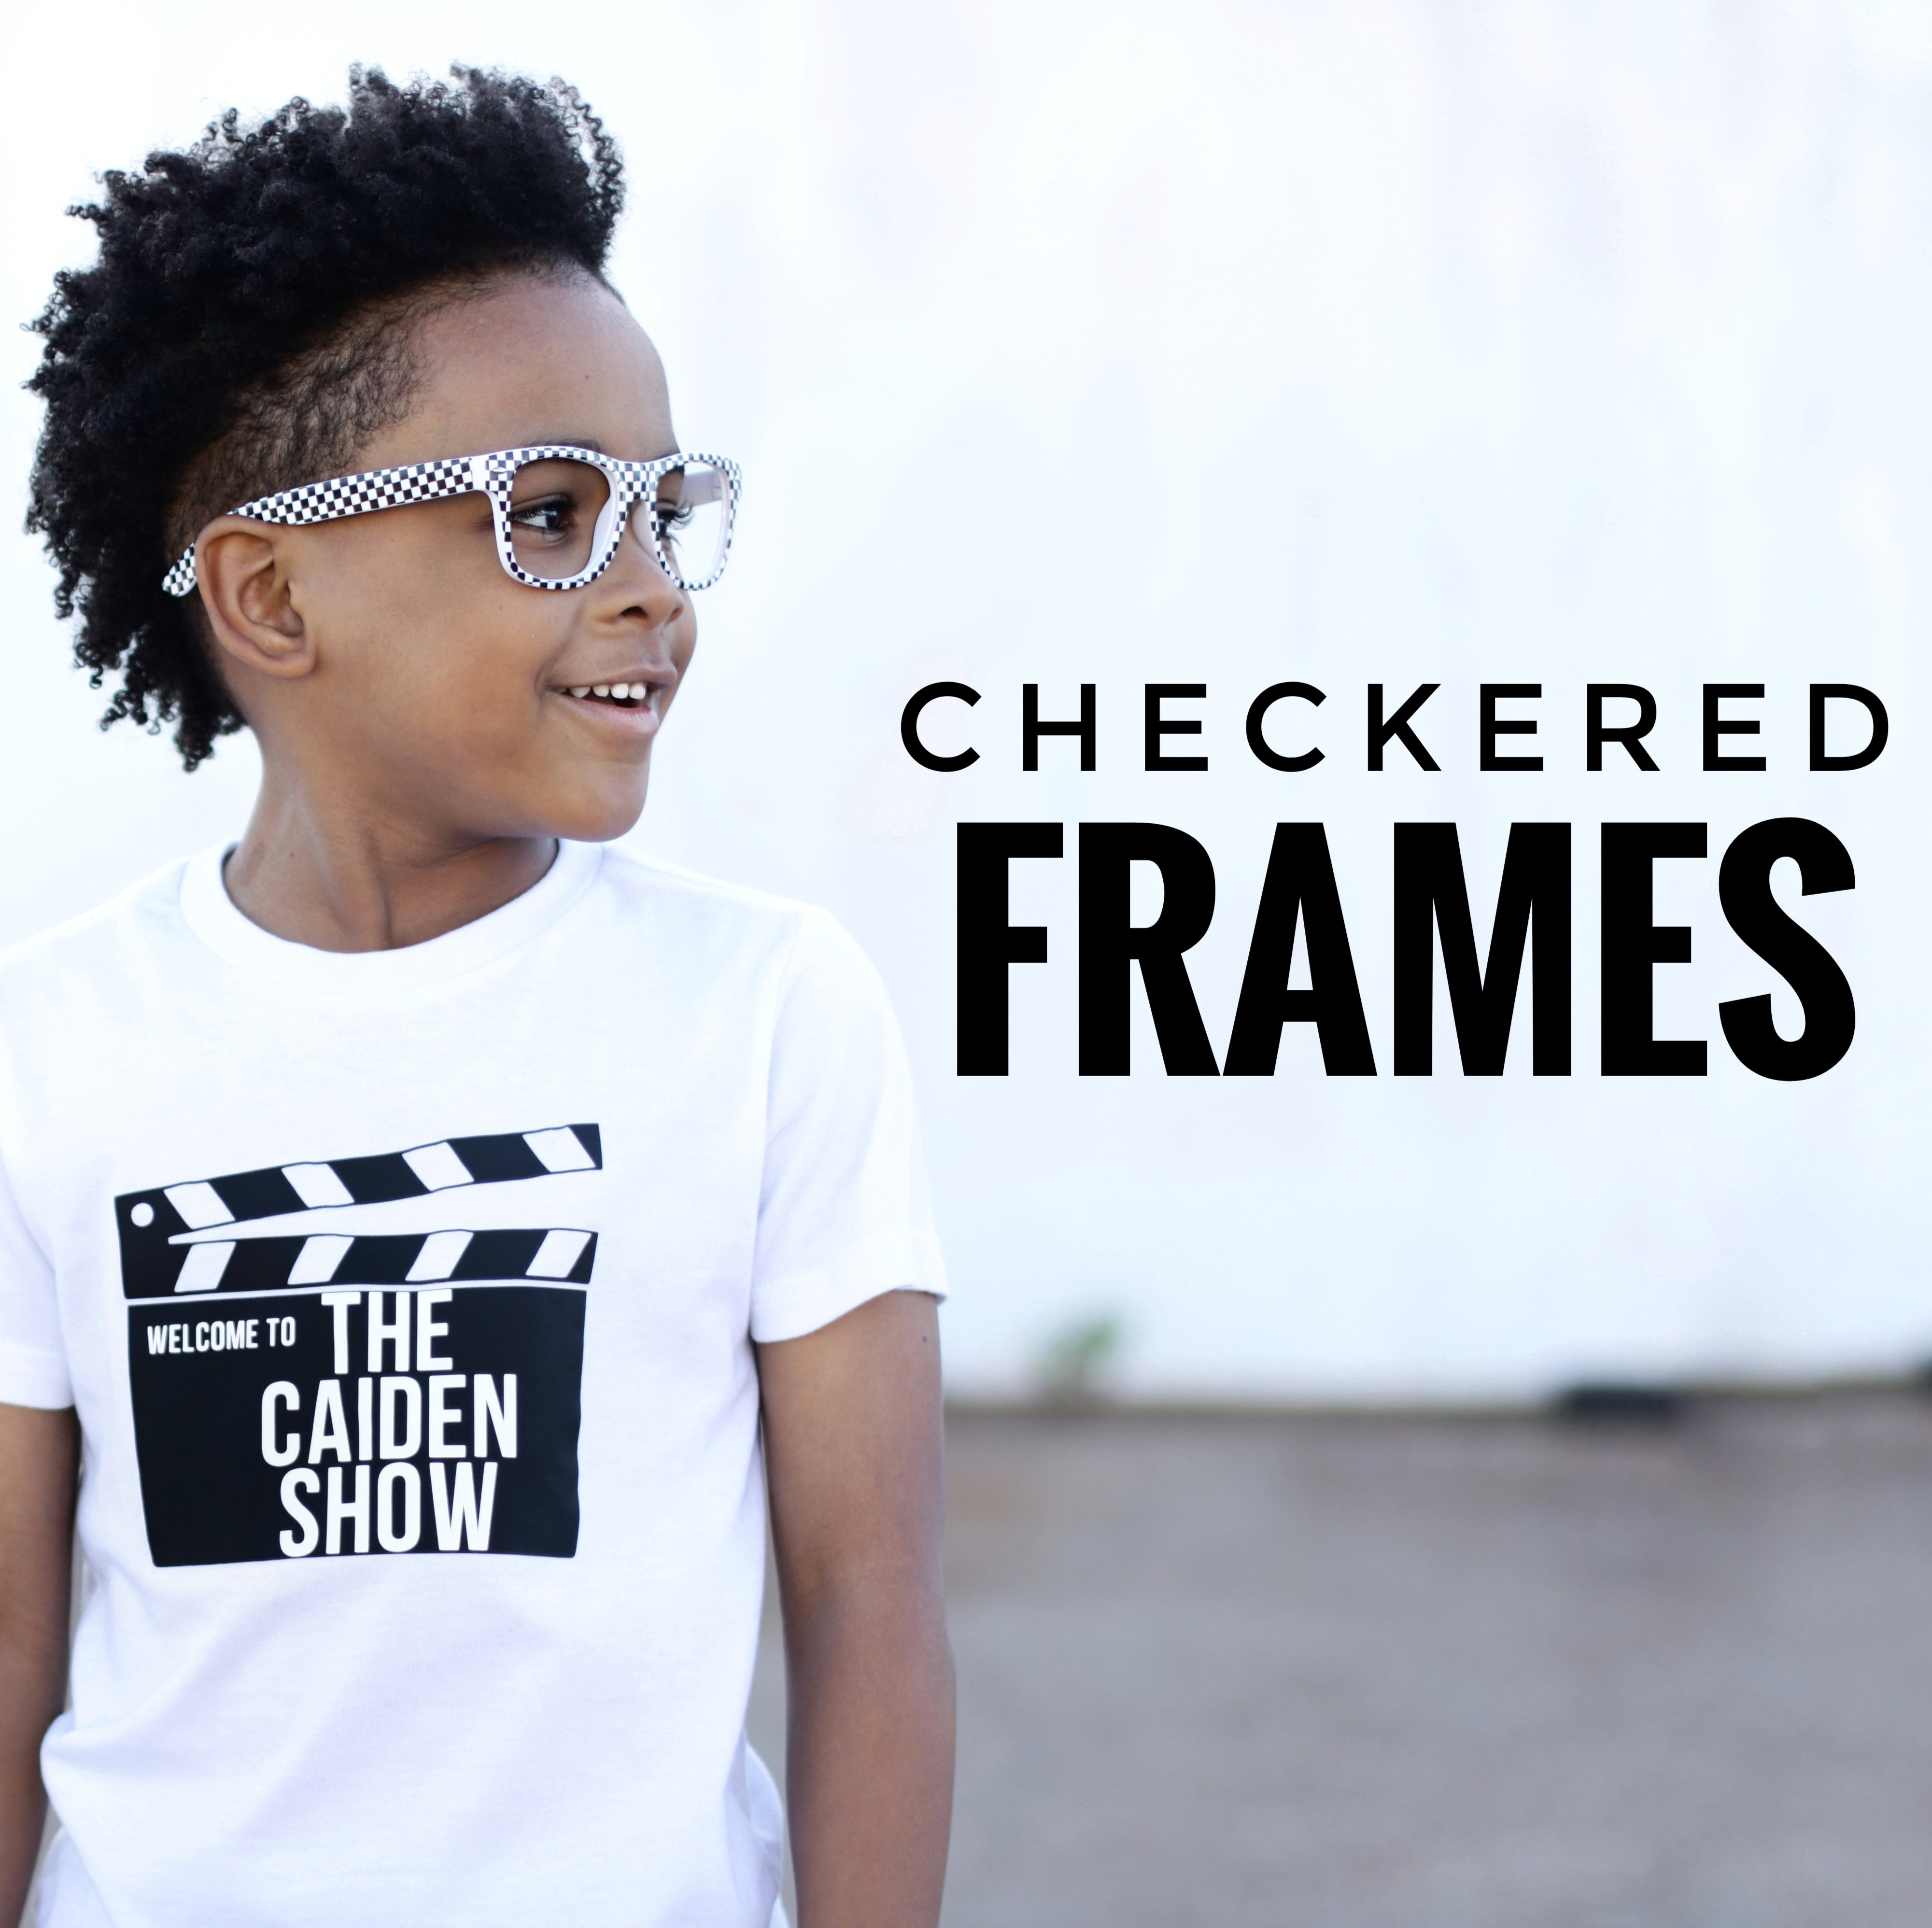 Just Checkered Frames